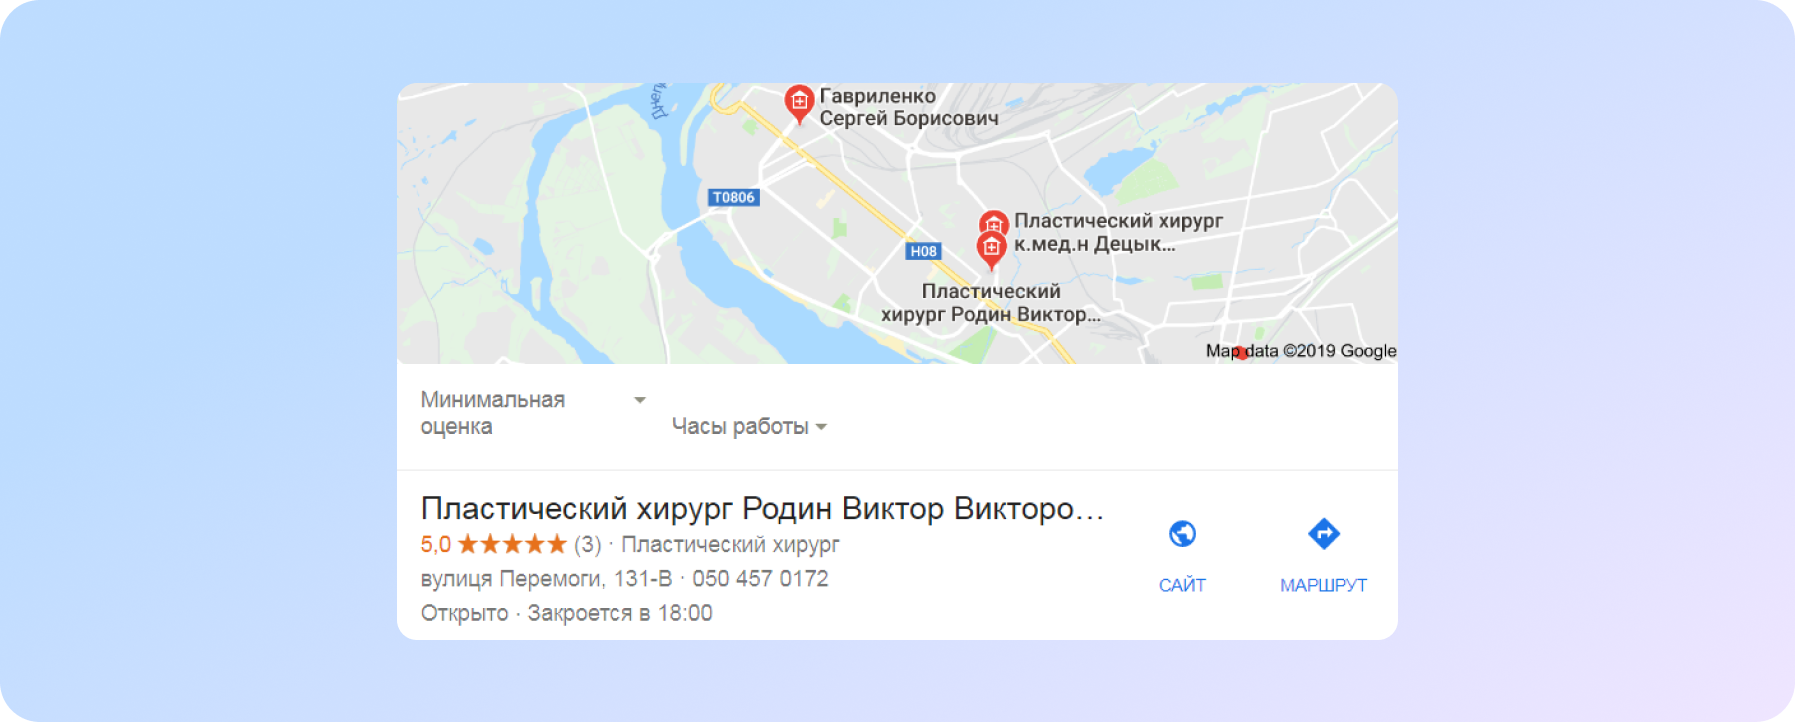 doctor's card on Google maps search results, on «plastic surgeon Zaporozhye»